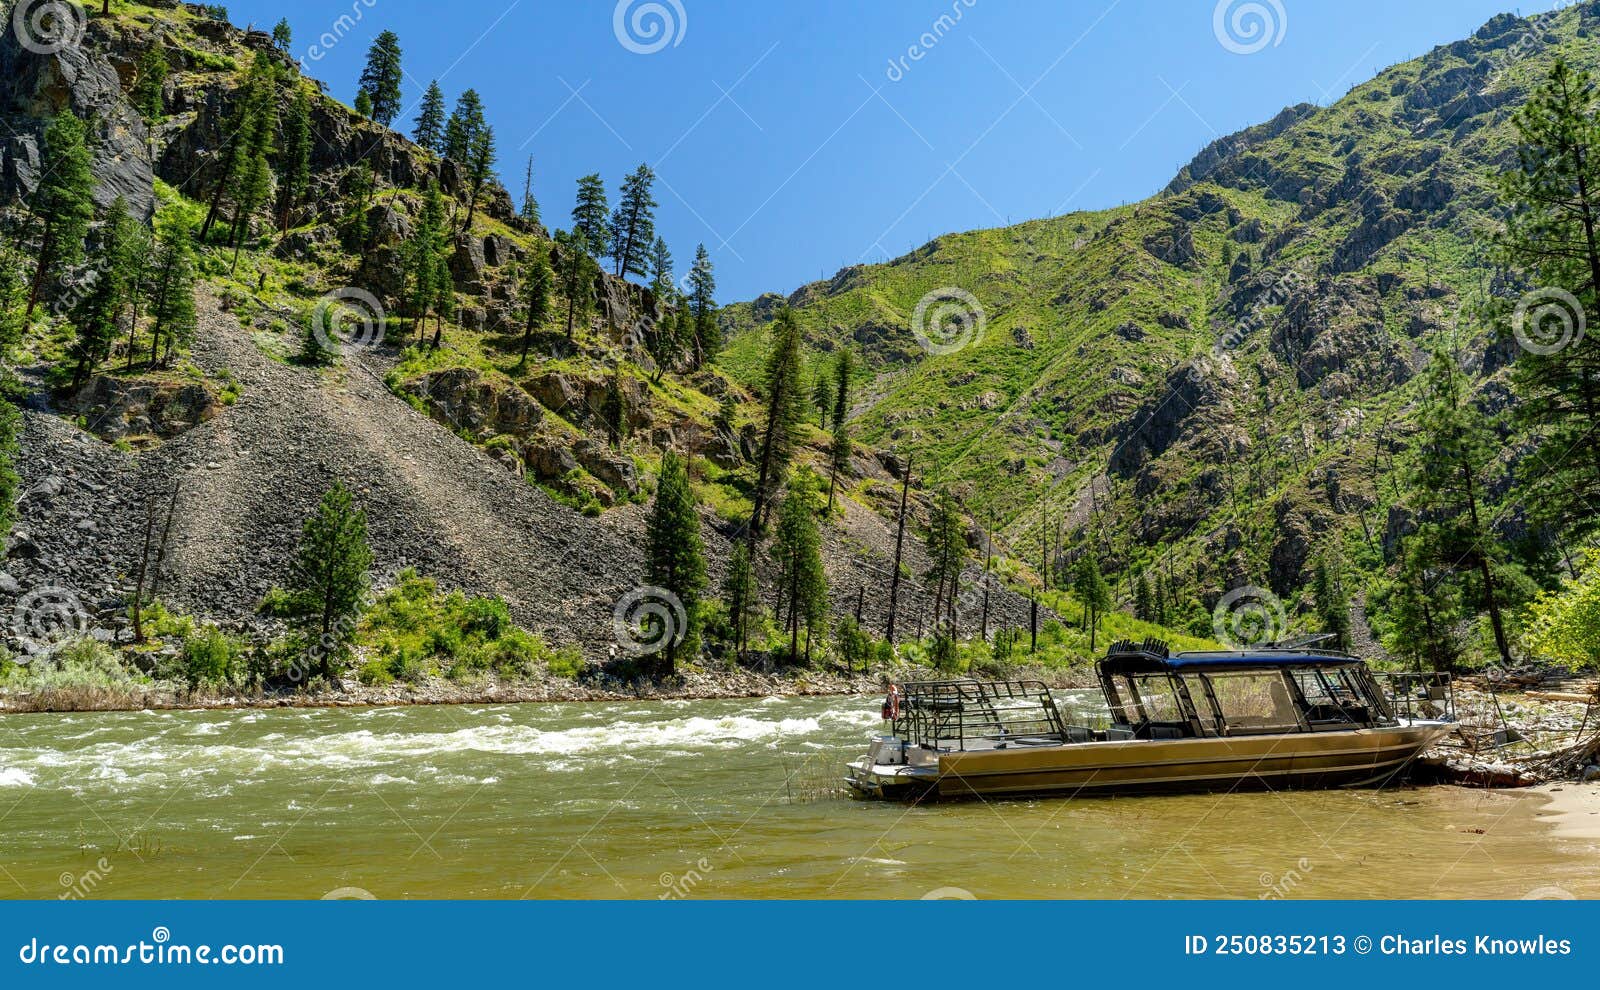 wild salmon river in idaho with a jet boat parked